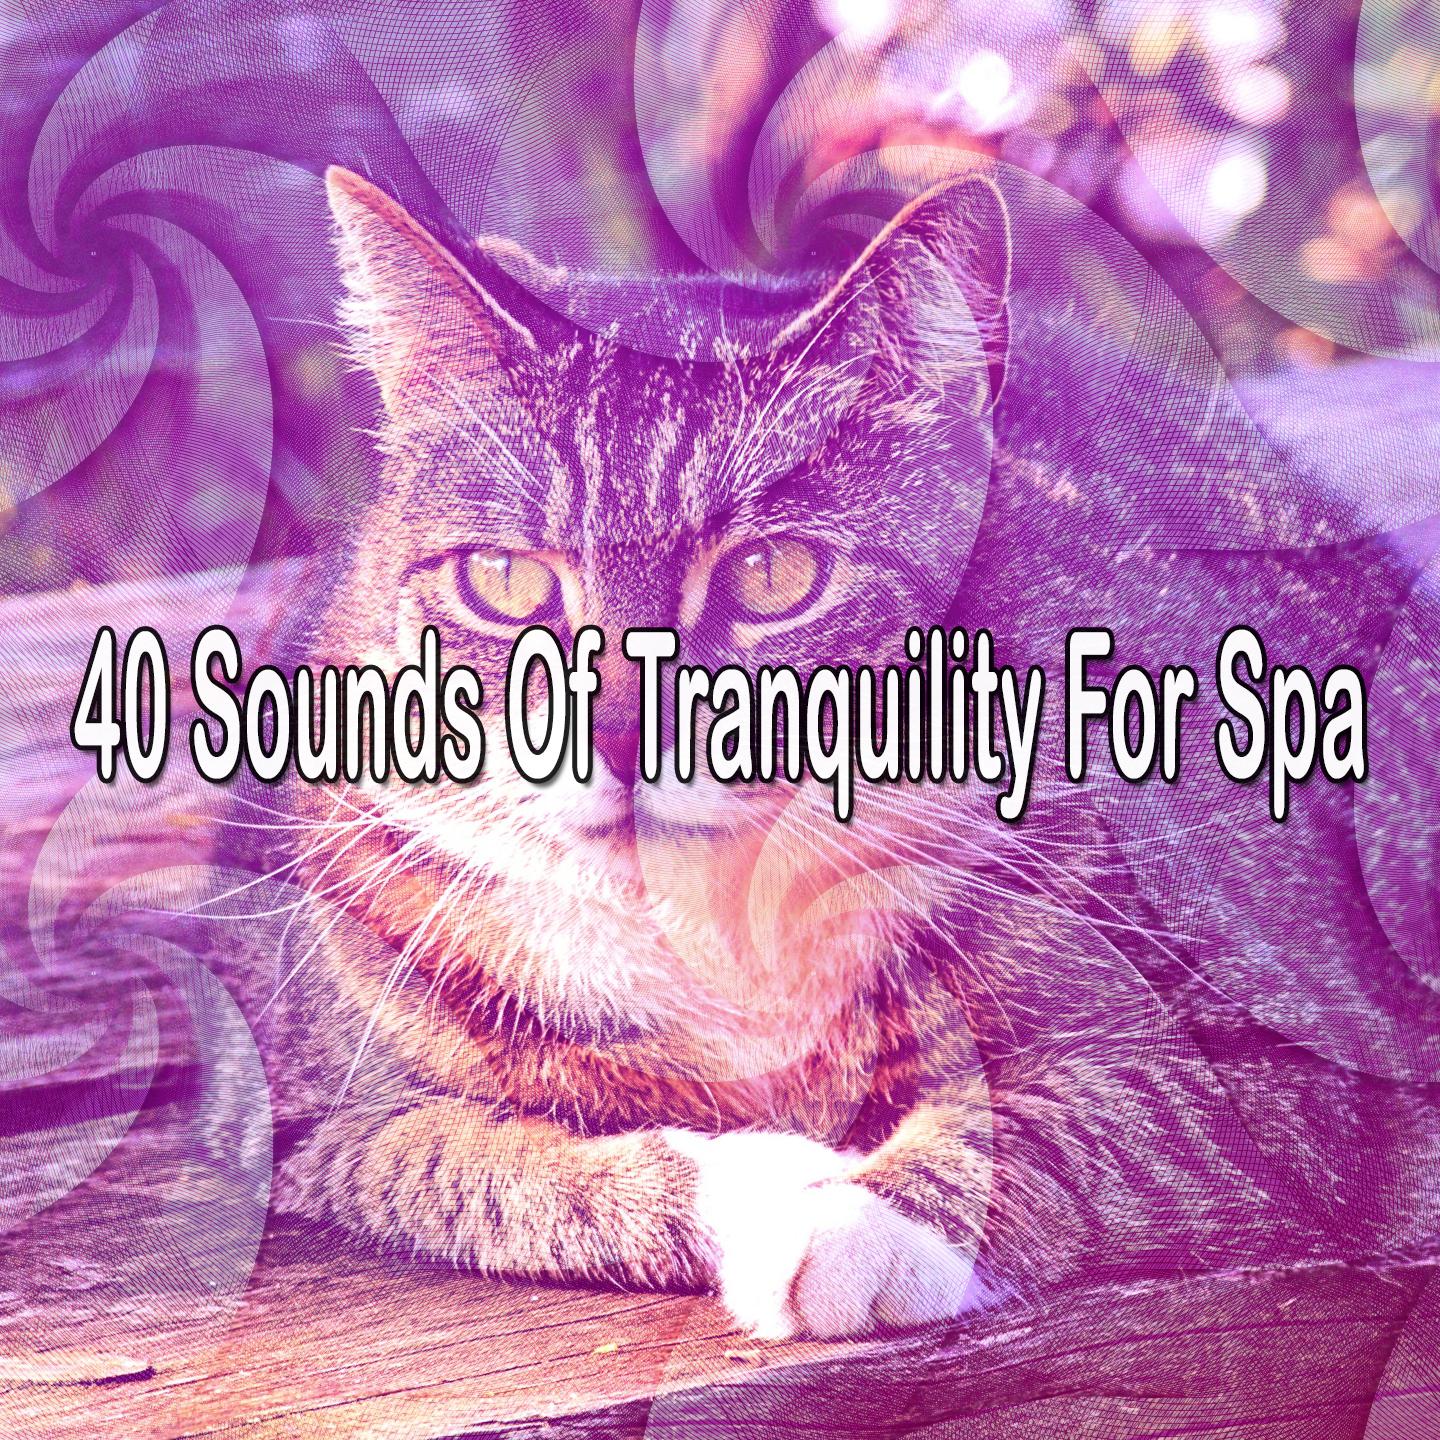 40 Sounds Of Tranquility For Spa